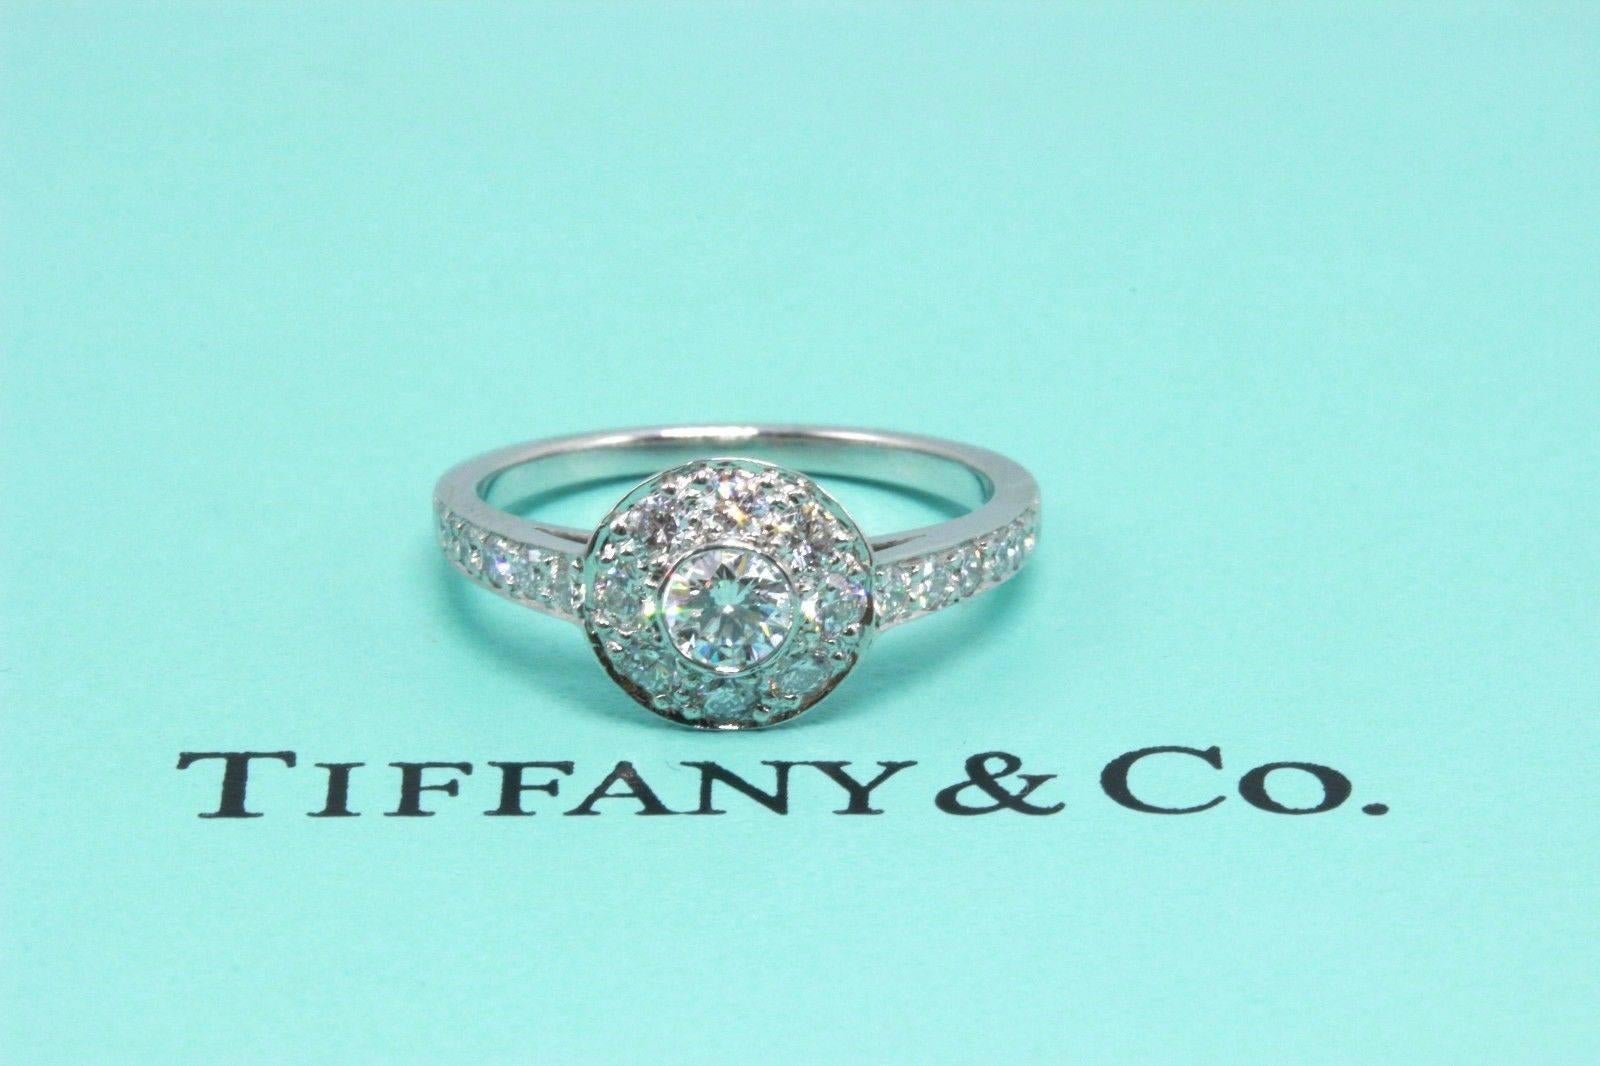 Tiffany & Co. Round Circlet 0.64 Carat G VS Diamond Engagement Ring in Platinum For Sale 2